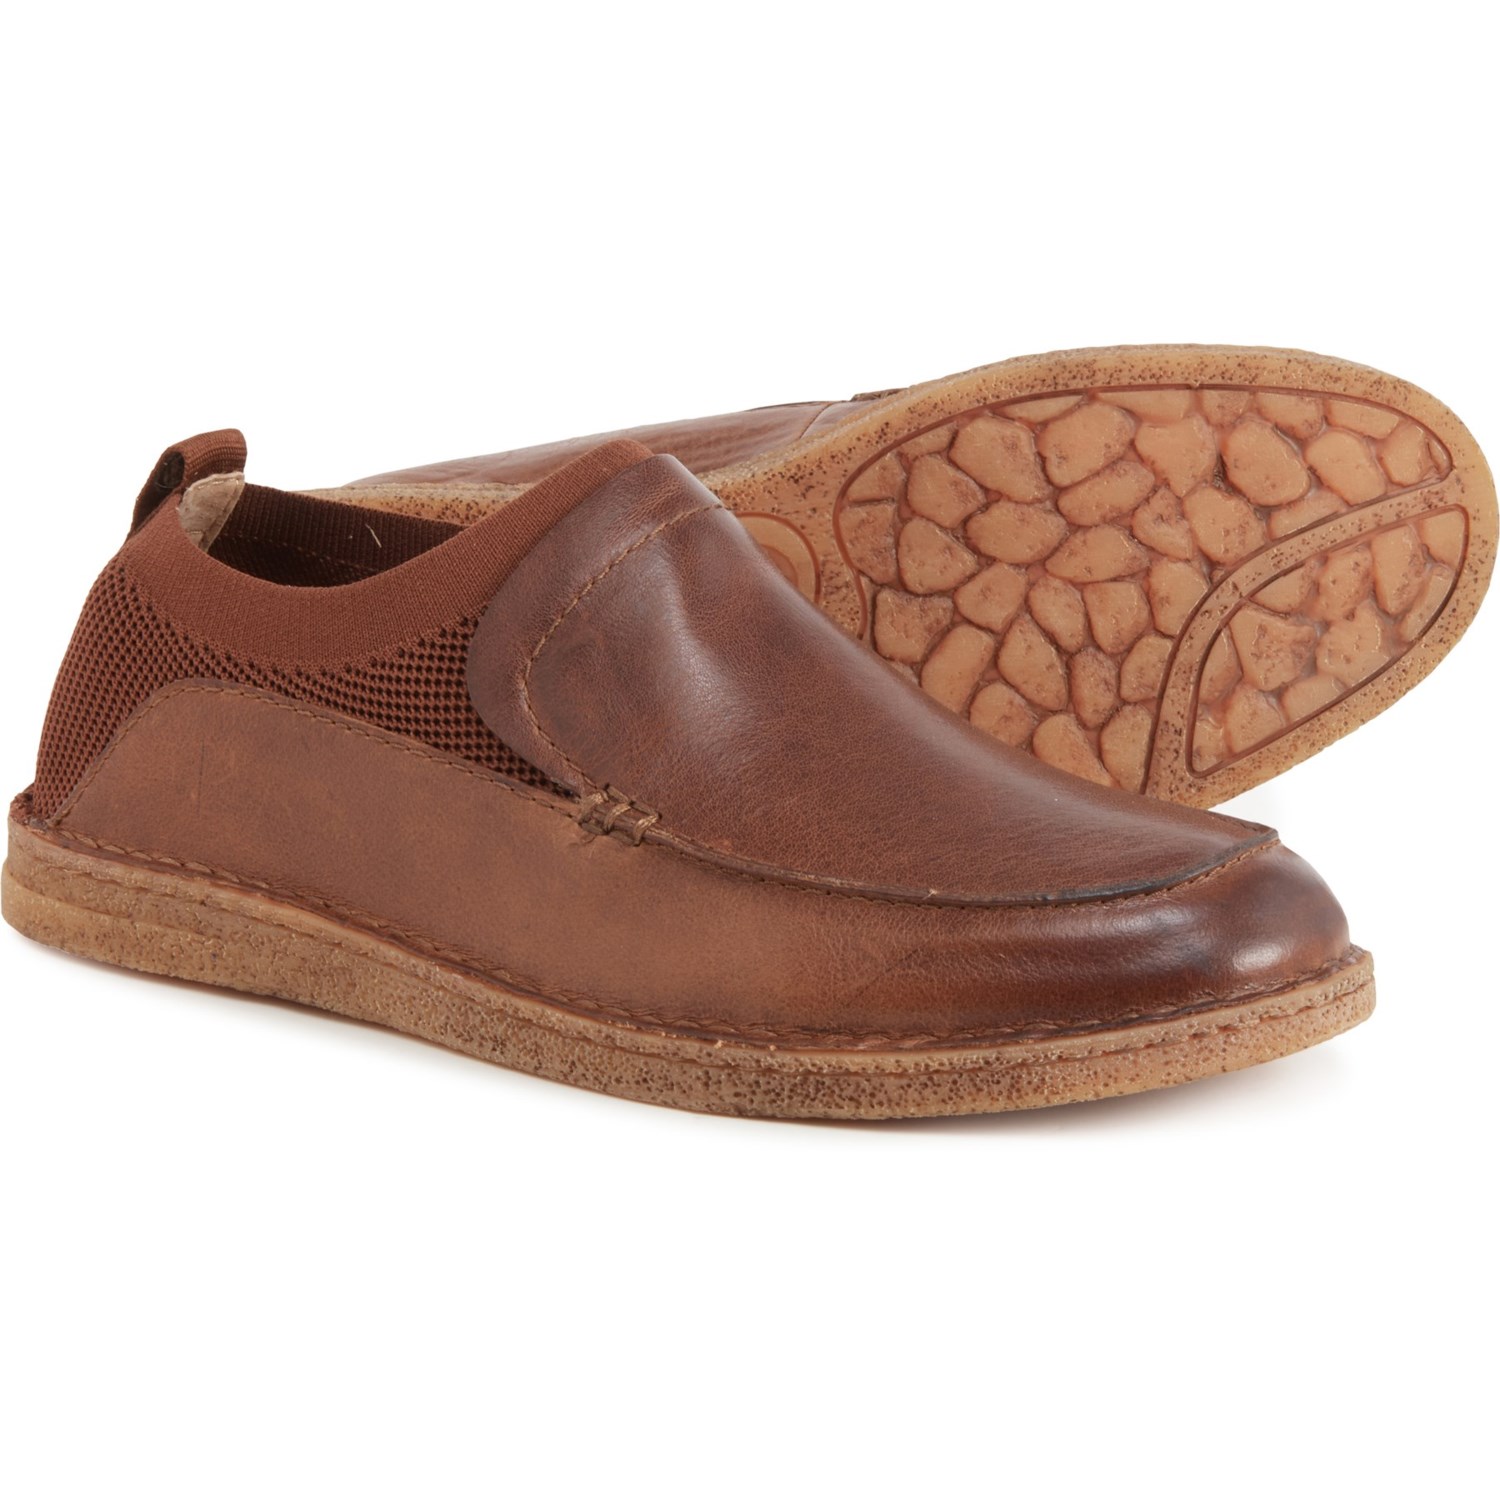 Born Samuel Loafers - Leather (For Men)